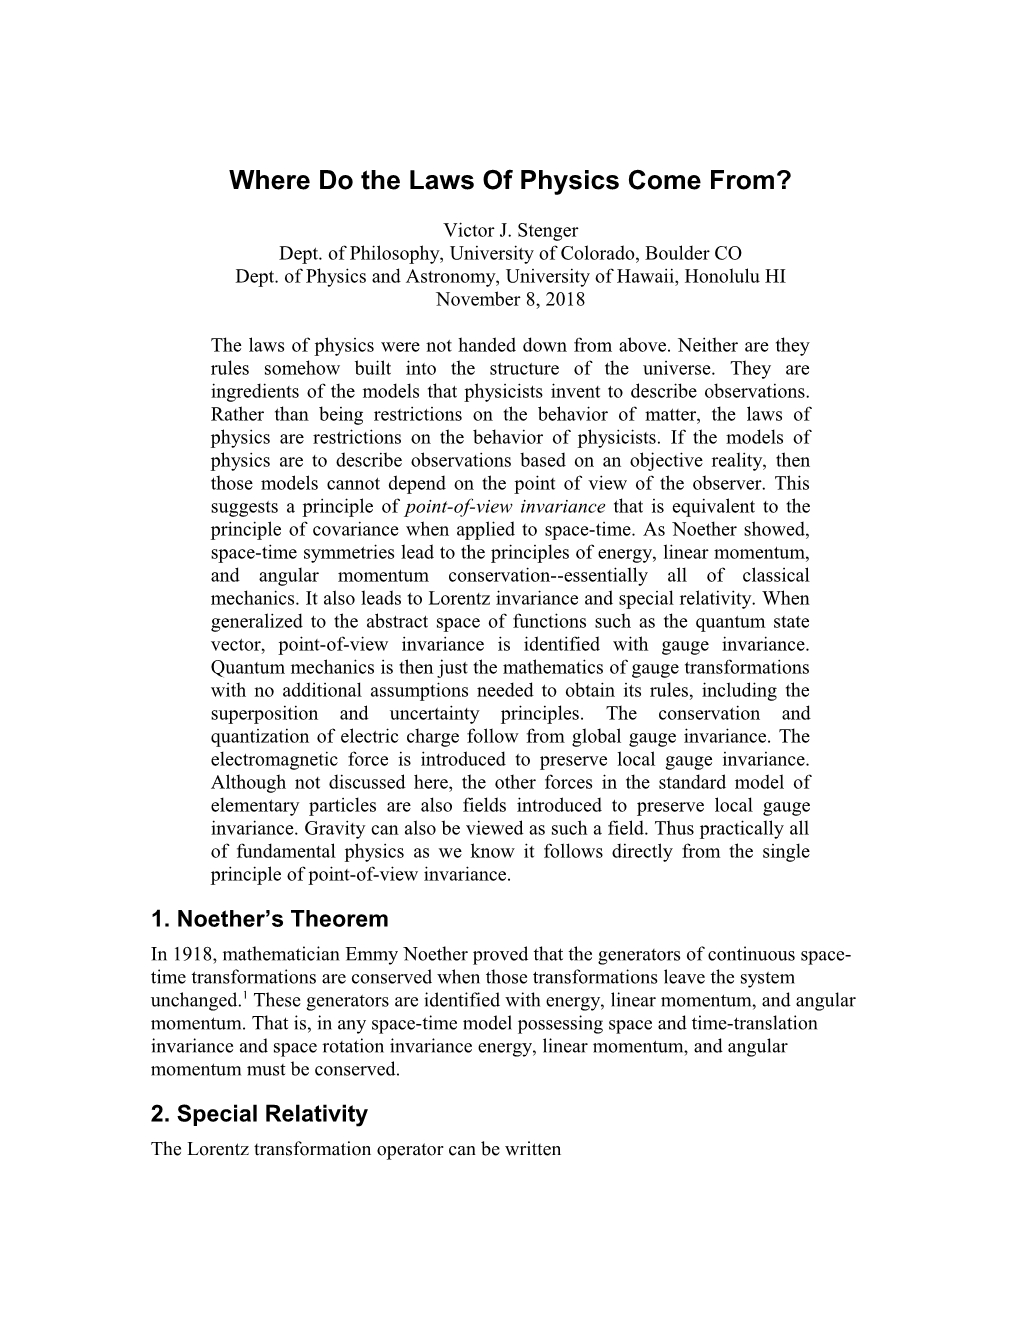 Where Do the Laws of Physics Come From?